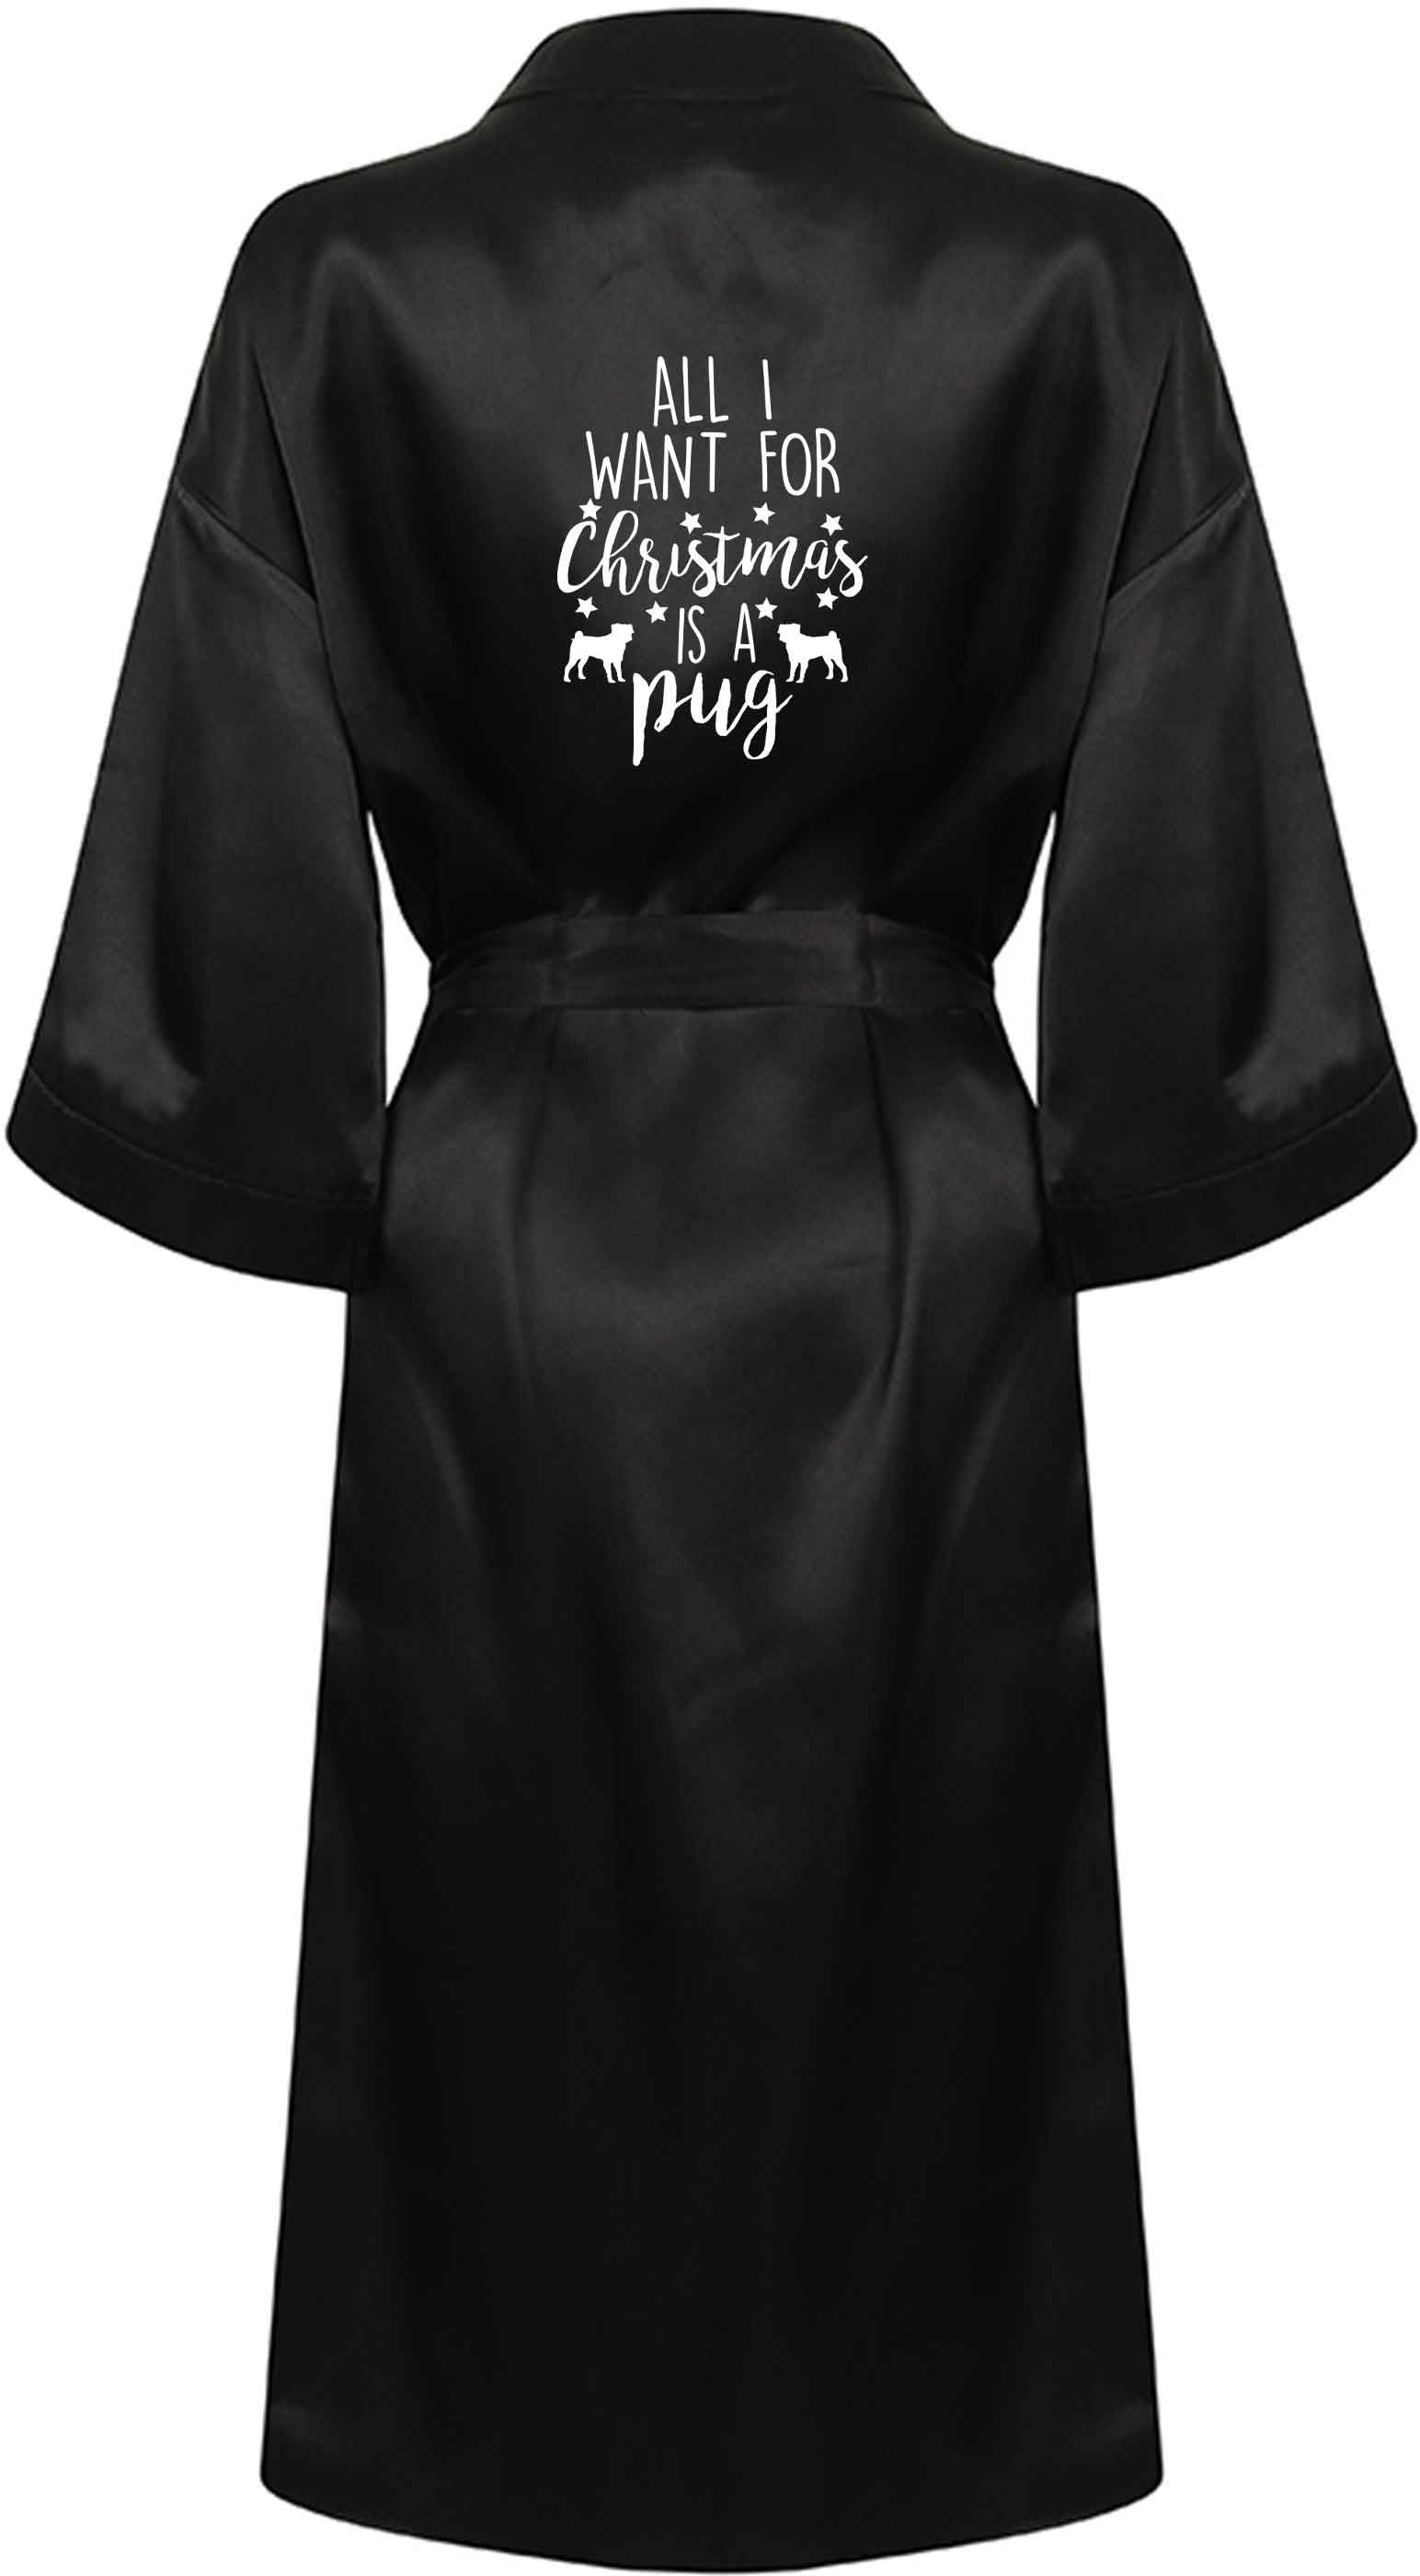 All I want for Christmas is a pug XL/XXL black ladies dressing gown size 16/18